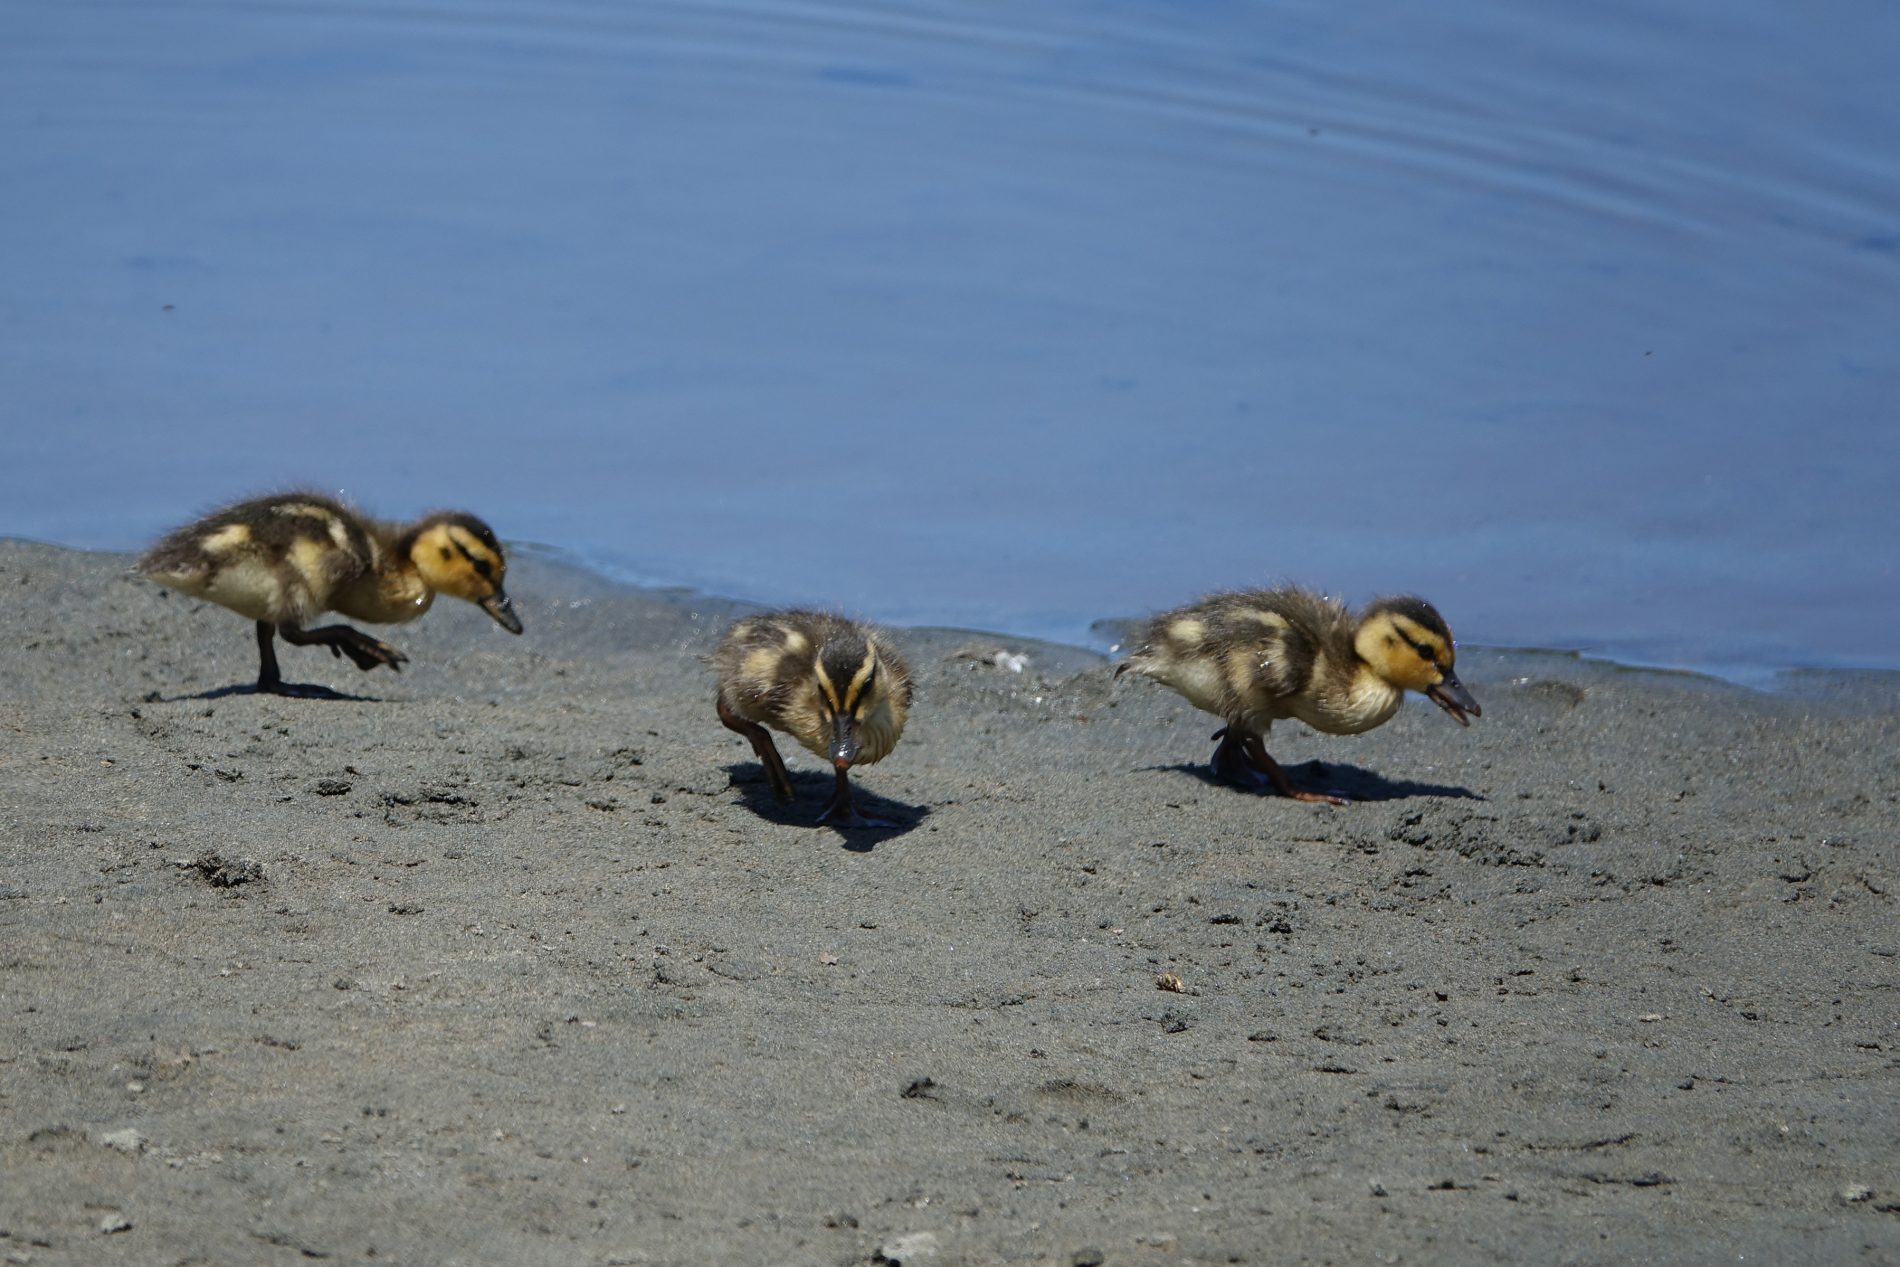 Three newly hatched baby ducks on Mountain Lake beach in San Francisco.